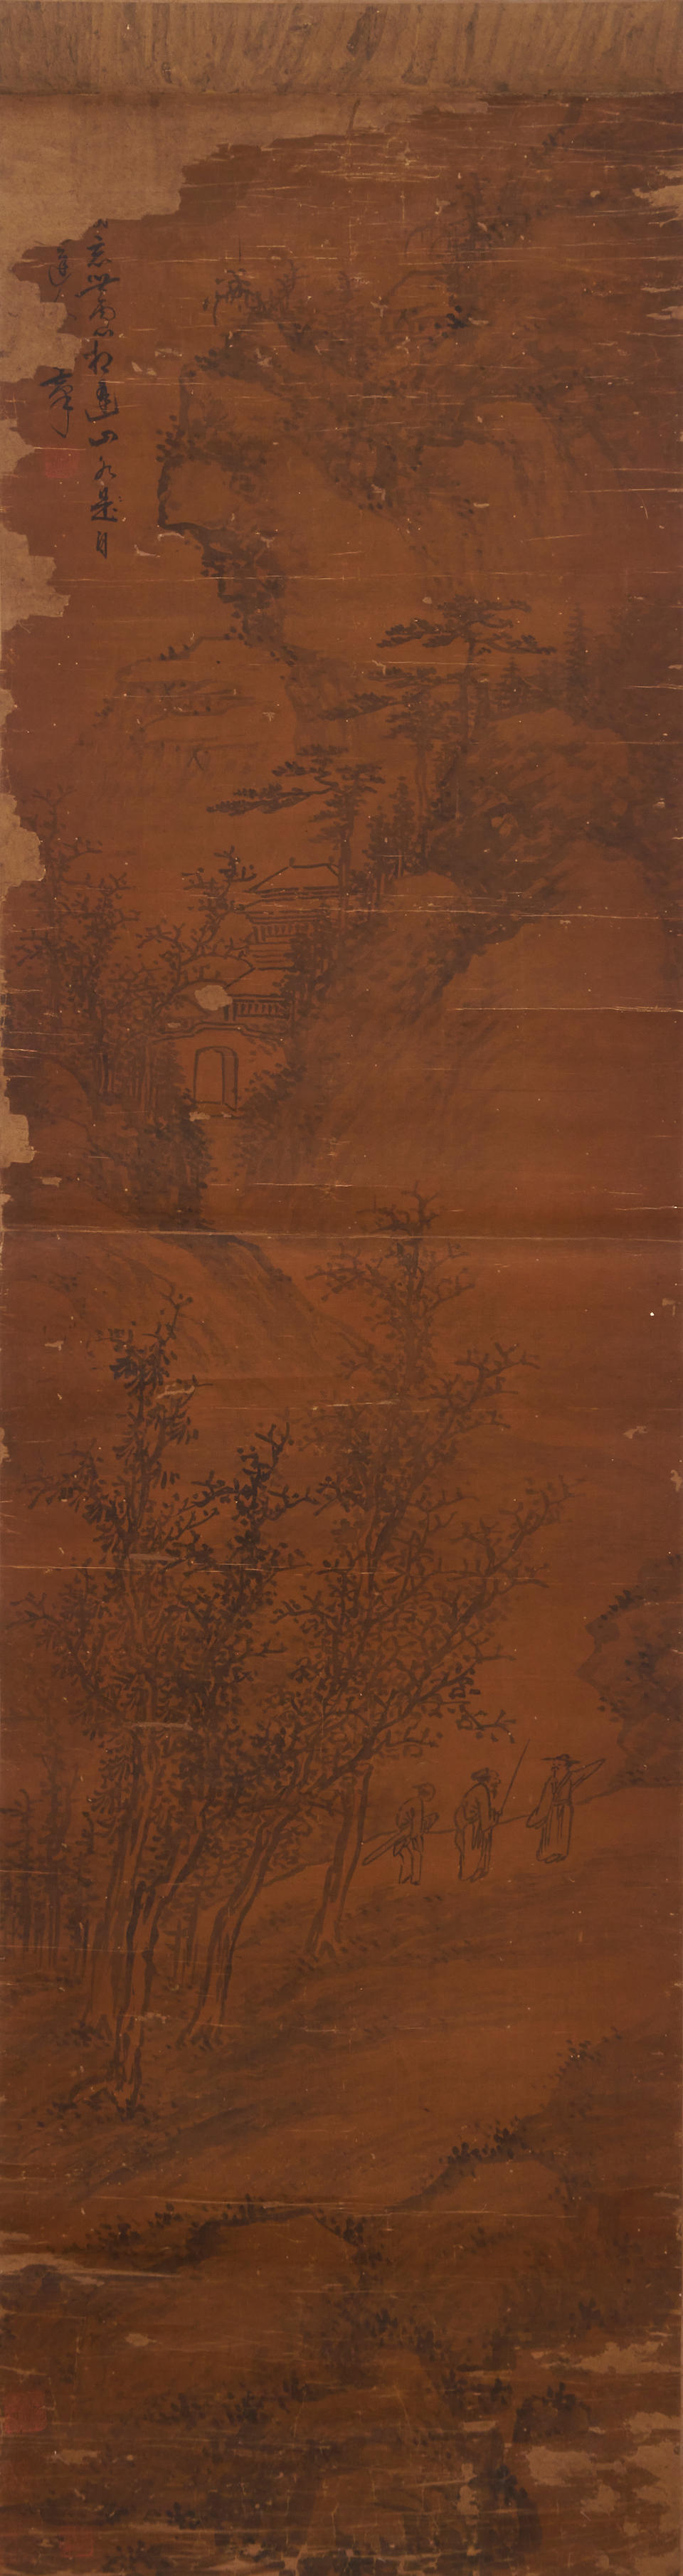 After to Wu Zhen (1280-1354) Landscape (4) - Image 3 of 5